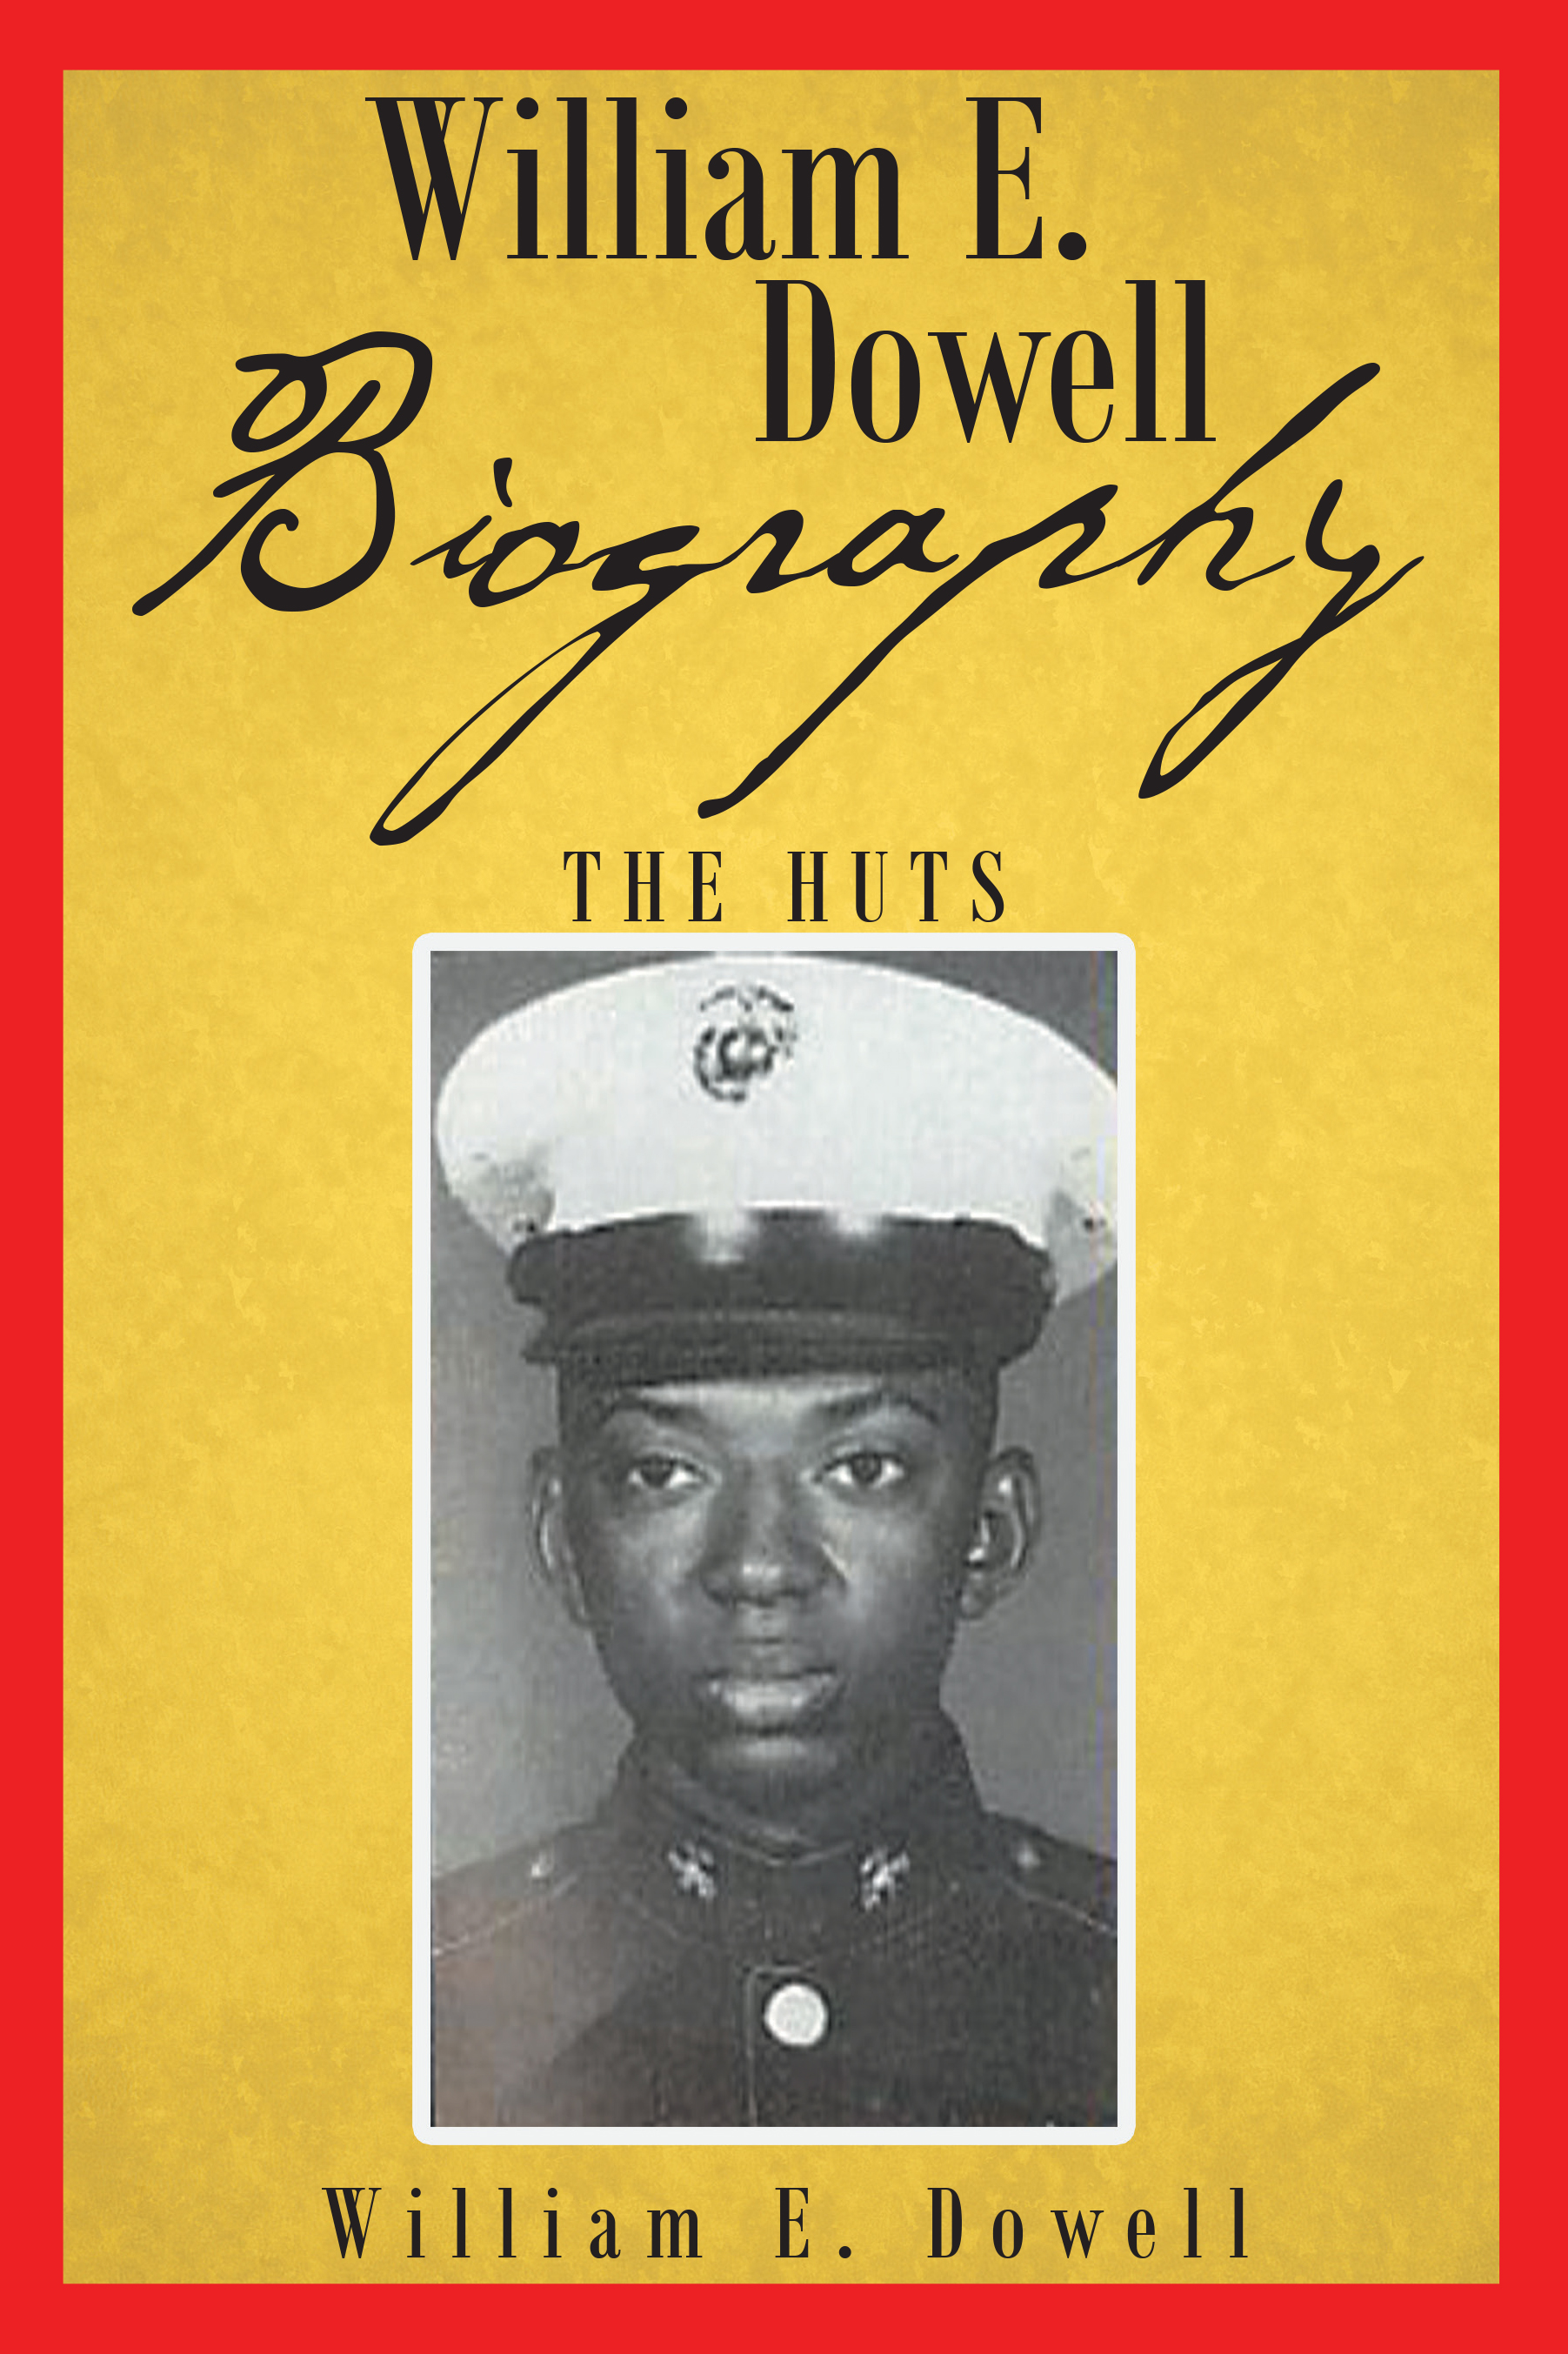 William E. Dowell - Biography Cover Image